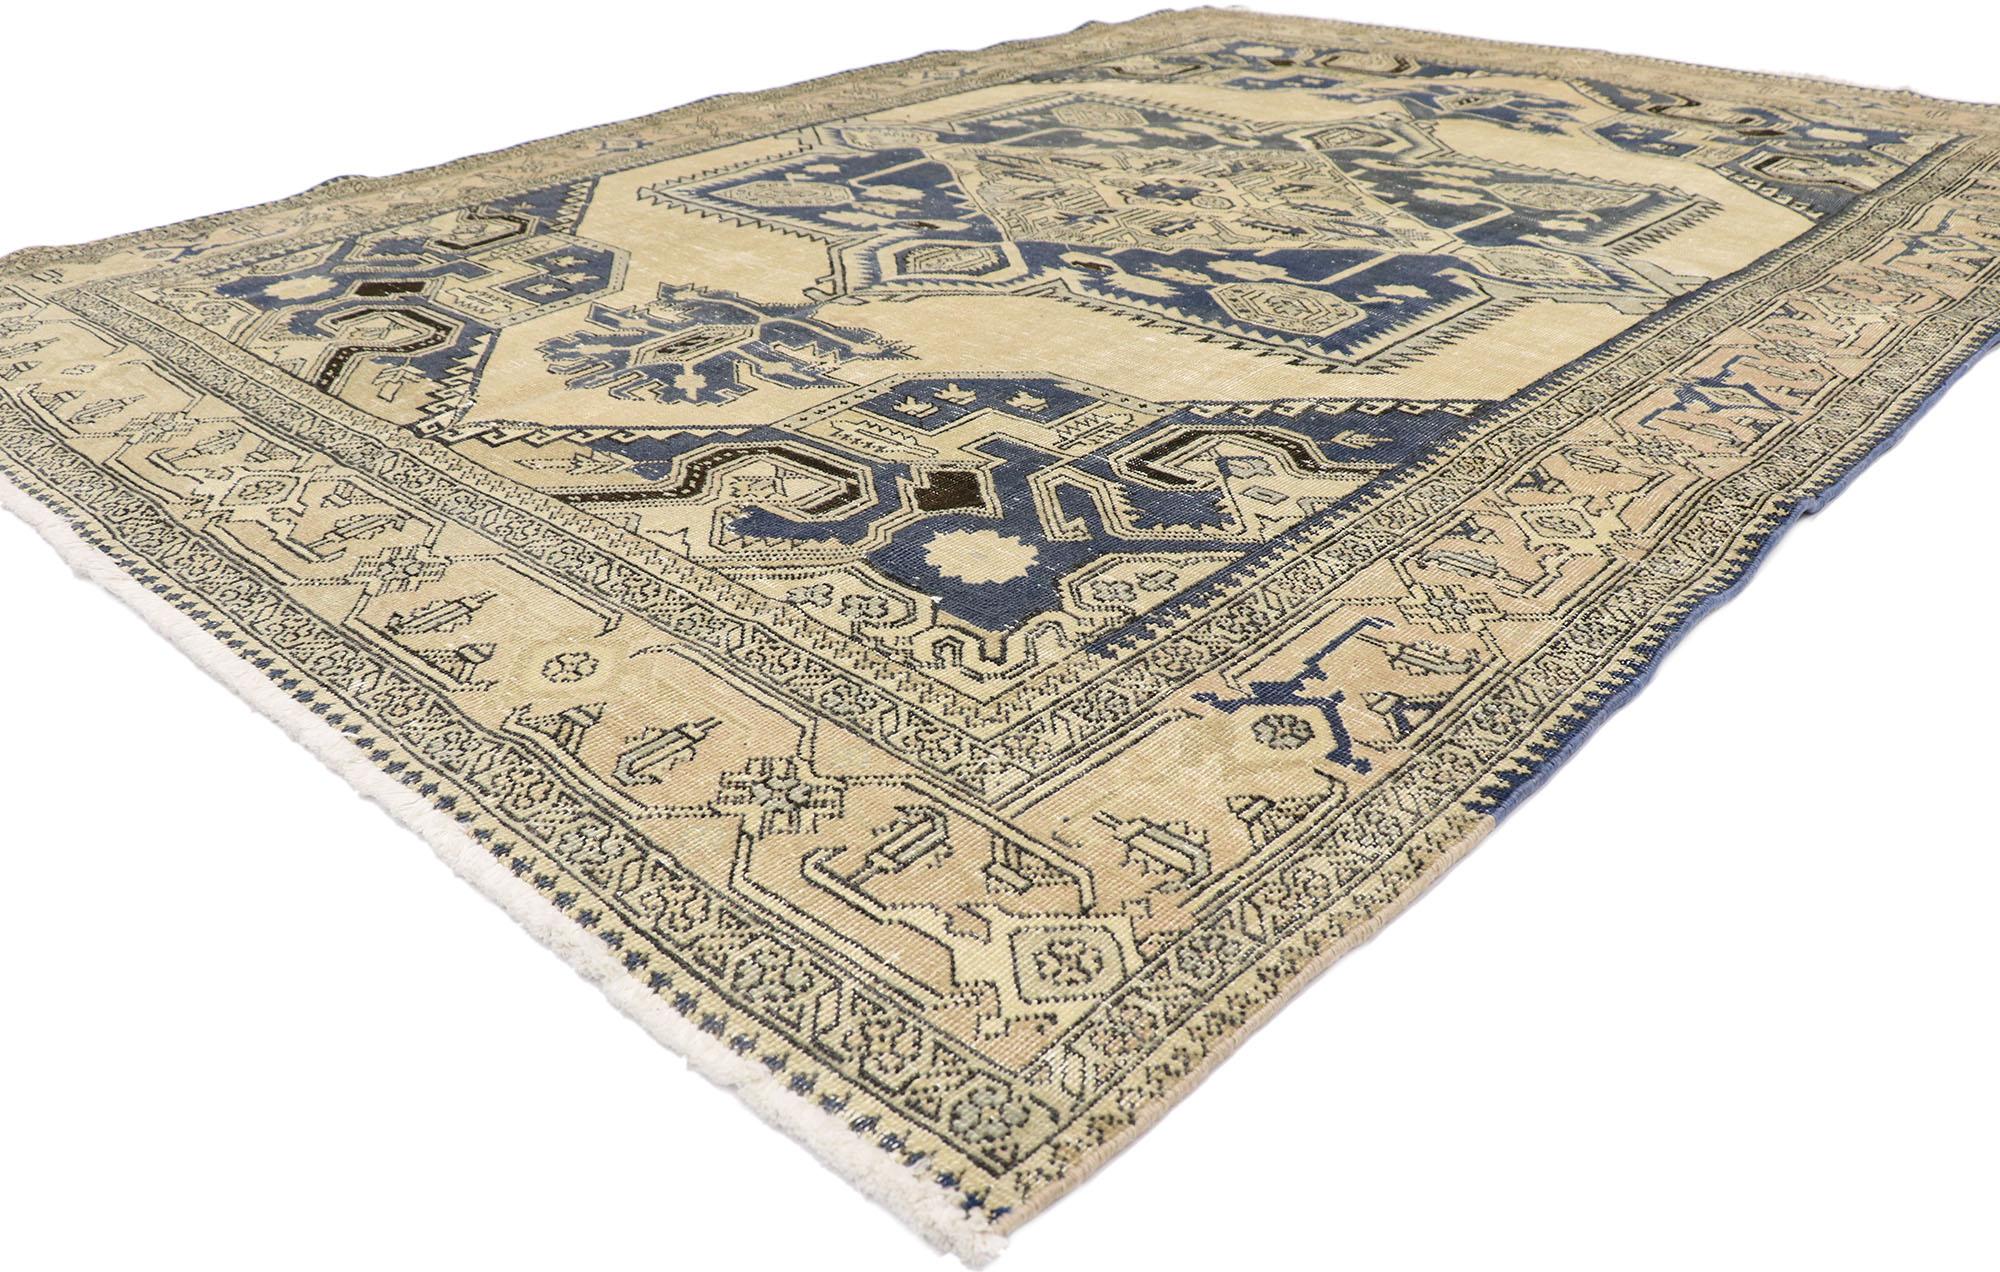 60943 Distressed Antique Persian Viss Rug, 06'11 x 09'10.
Prepare to embark on a captivating journey, guided by the tender embrace of this meticulously hand-knotted wool antique Persian Viss rug. Immerse yourself in a world of mesmerizing beauty,